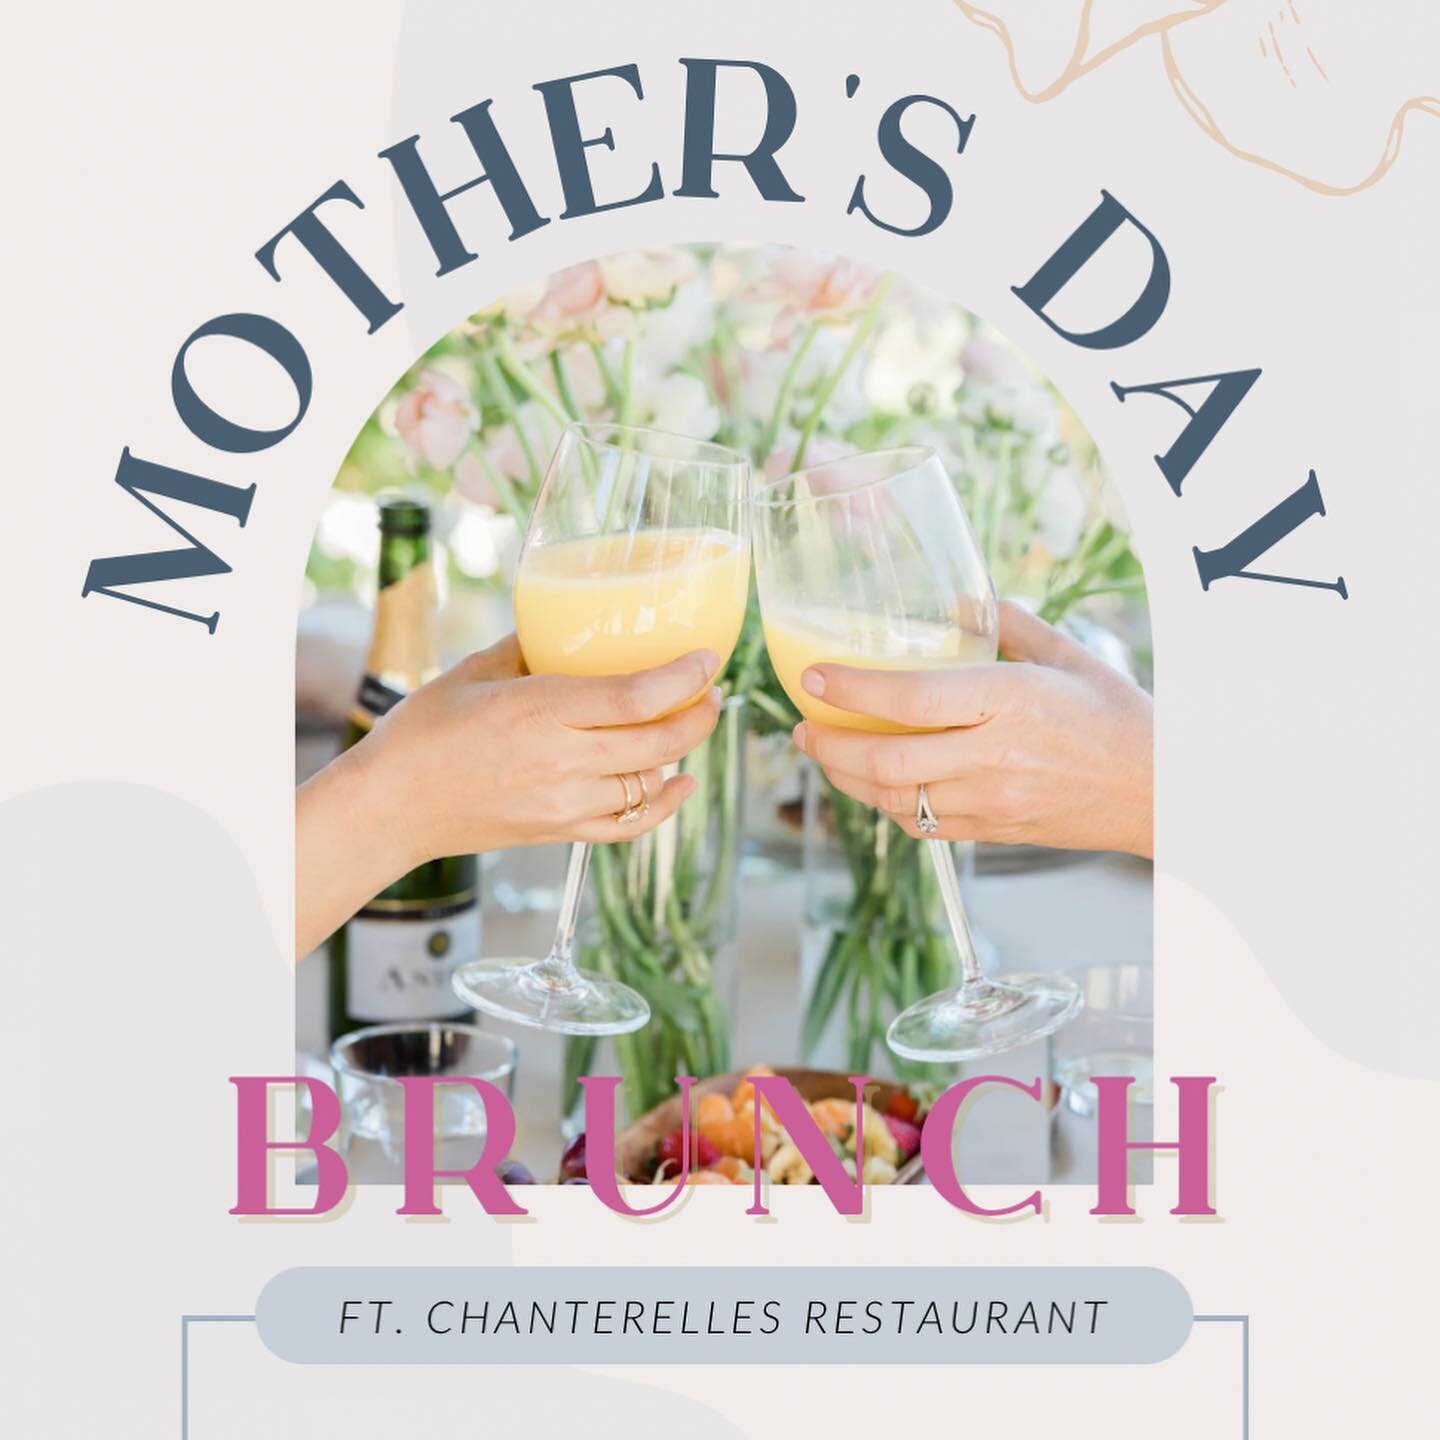 Brunch w/ Mom at The Library this Mother&rsquo;s Day. 💐 🥂 🍽️ 

@chanterelle_american will be offering a beautiful all-you-can-eat brunch, buffet style on the beautiful patio at The Library 11am-5pm!

carving station. mimosas. &amp; more. 

Enjoy a